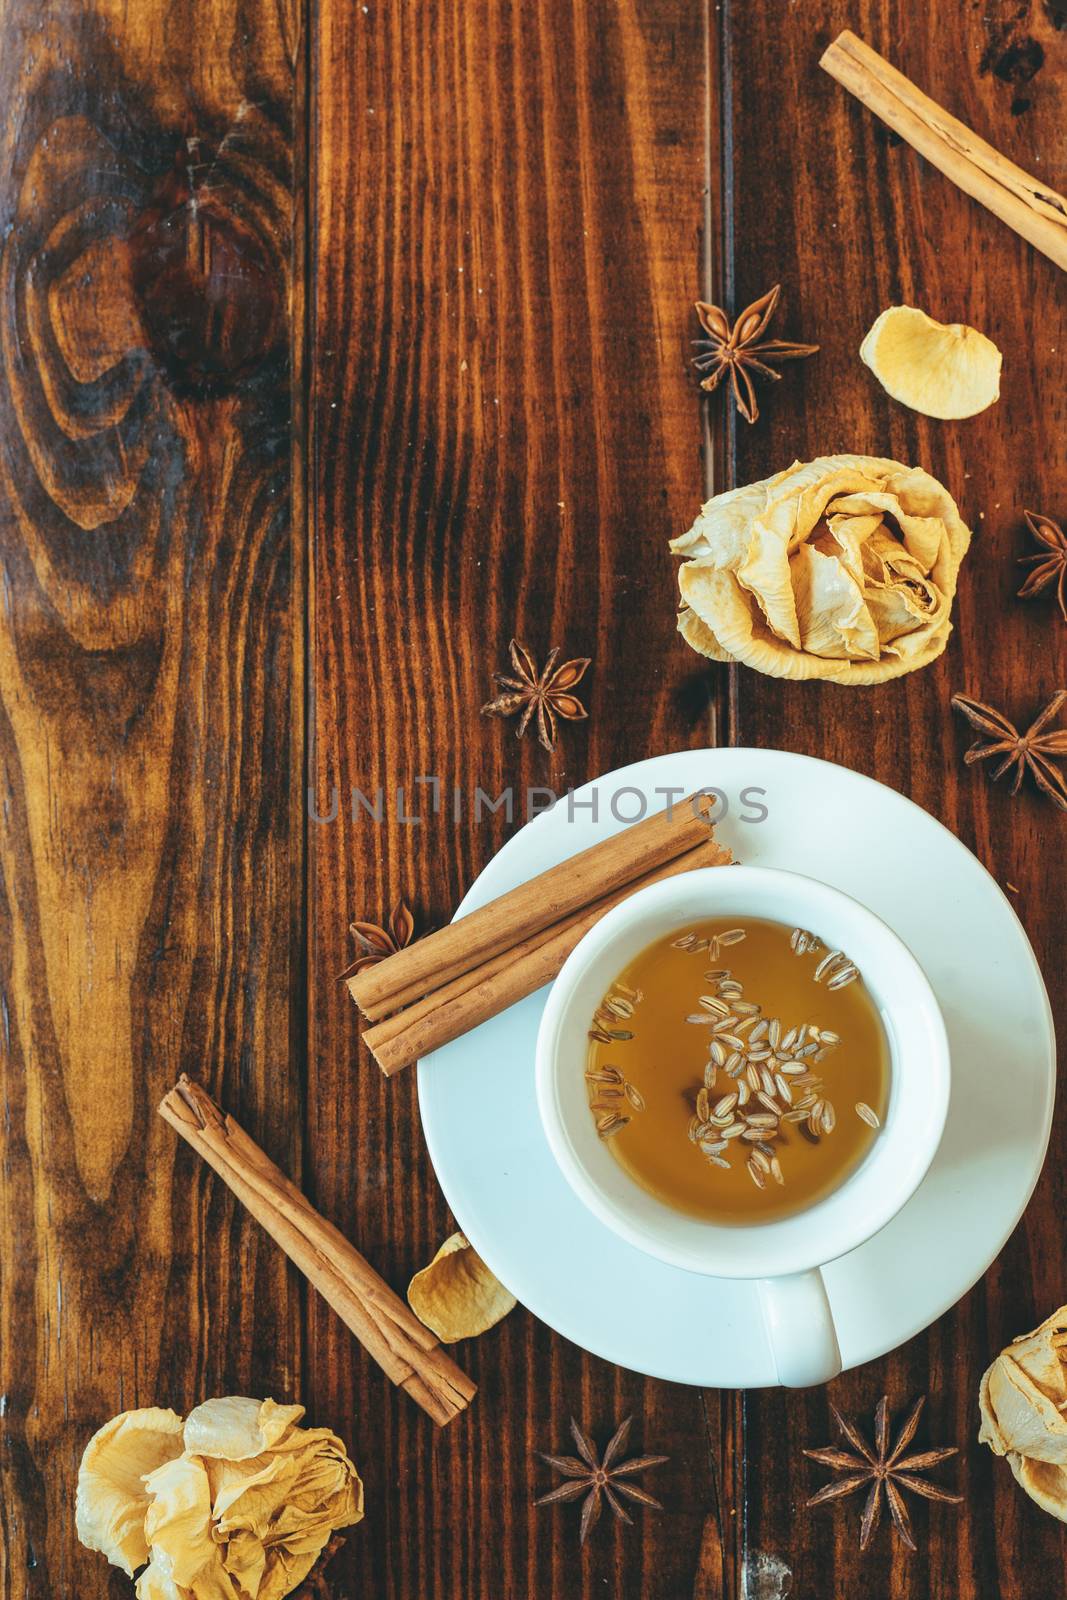 White cup of tea on a wooden table and roses and anise around